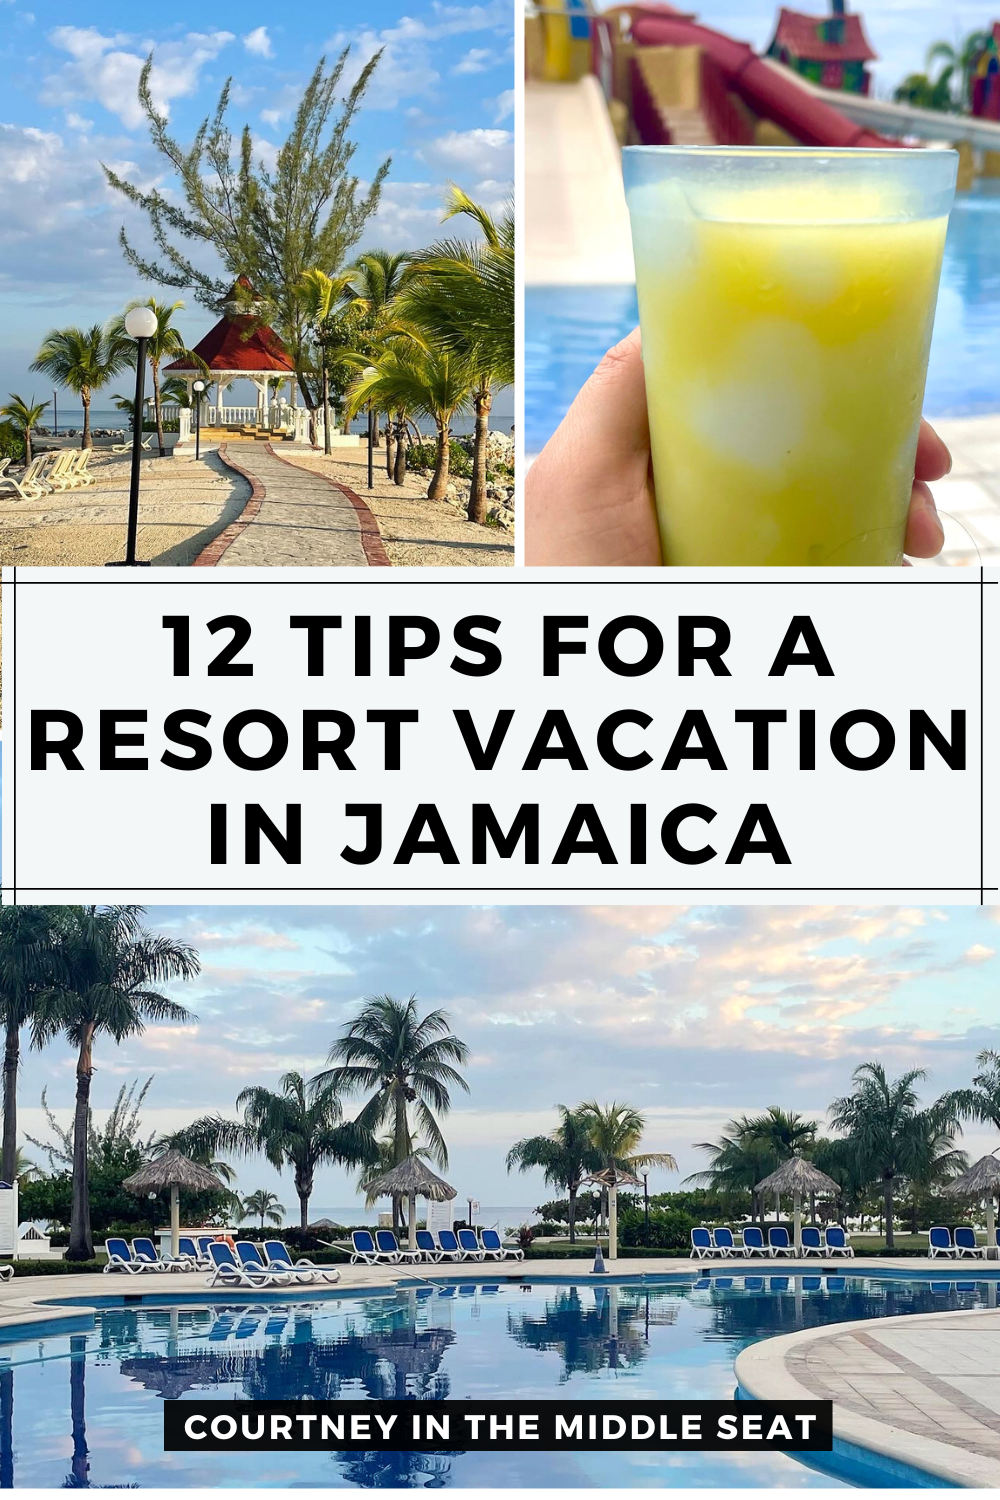 Tips for Jamaican Vacation Pin 1 - Things you want to know when visiting a Resort in Jamaica